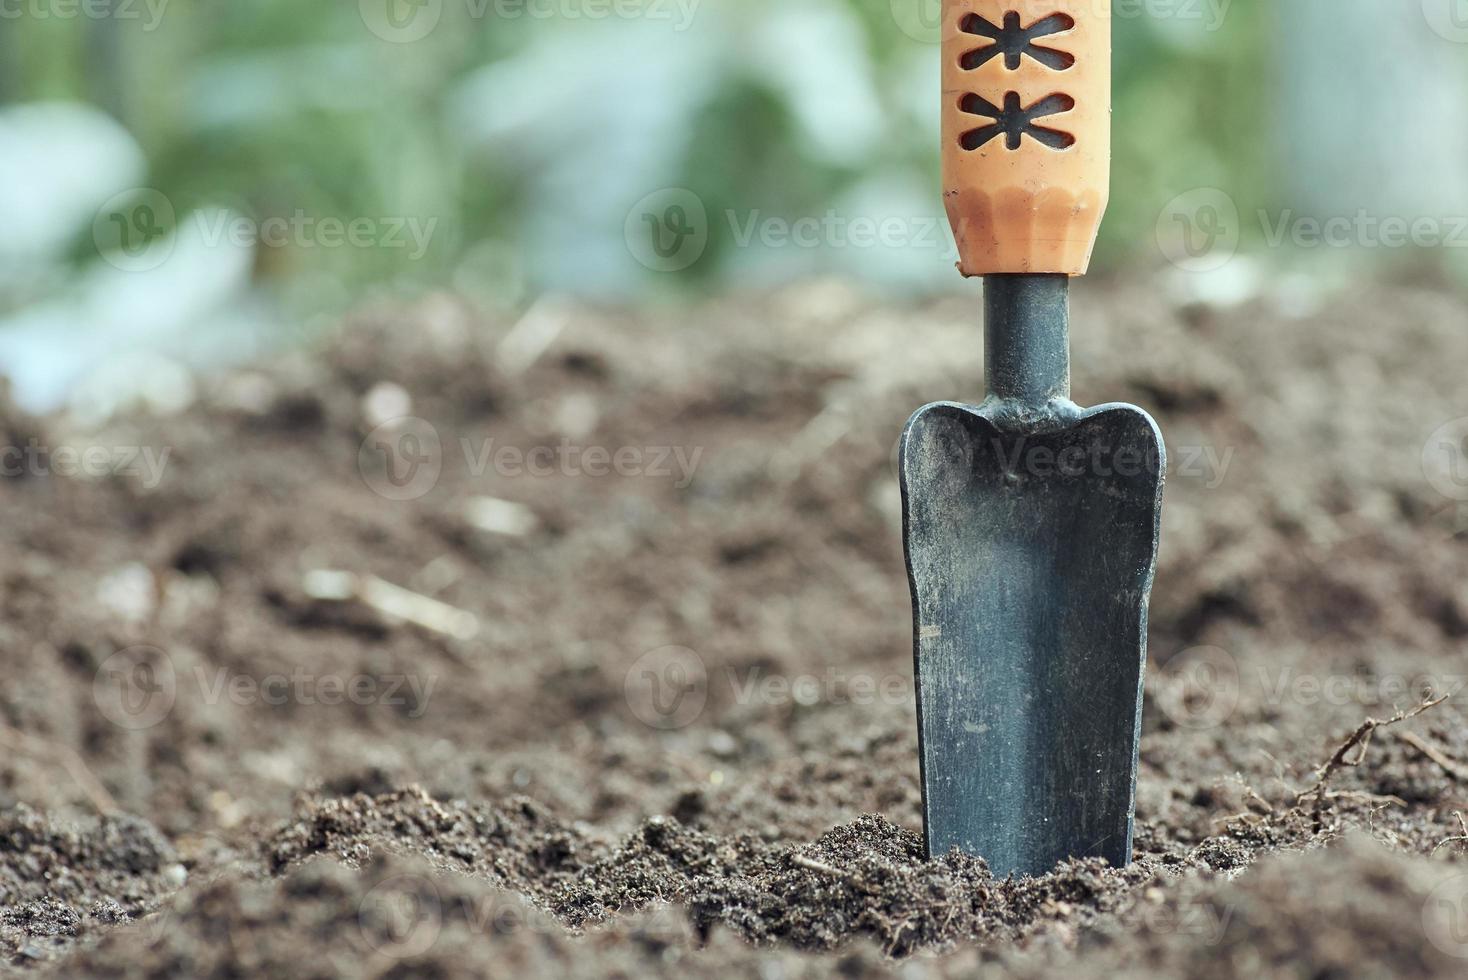 Garden trowel on the ground against the background of soil and green leaves in blur. photo